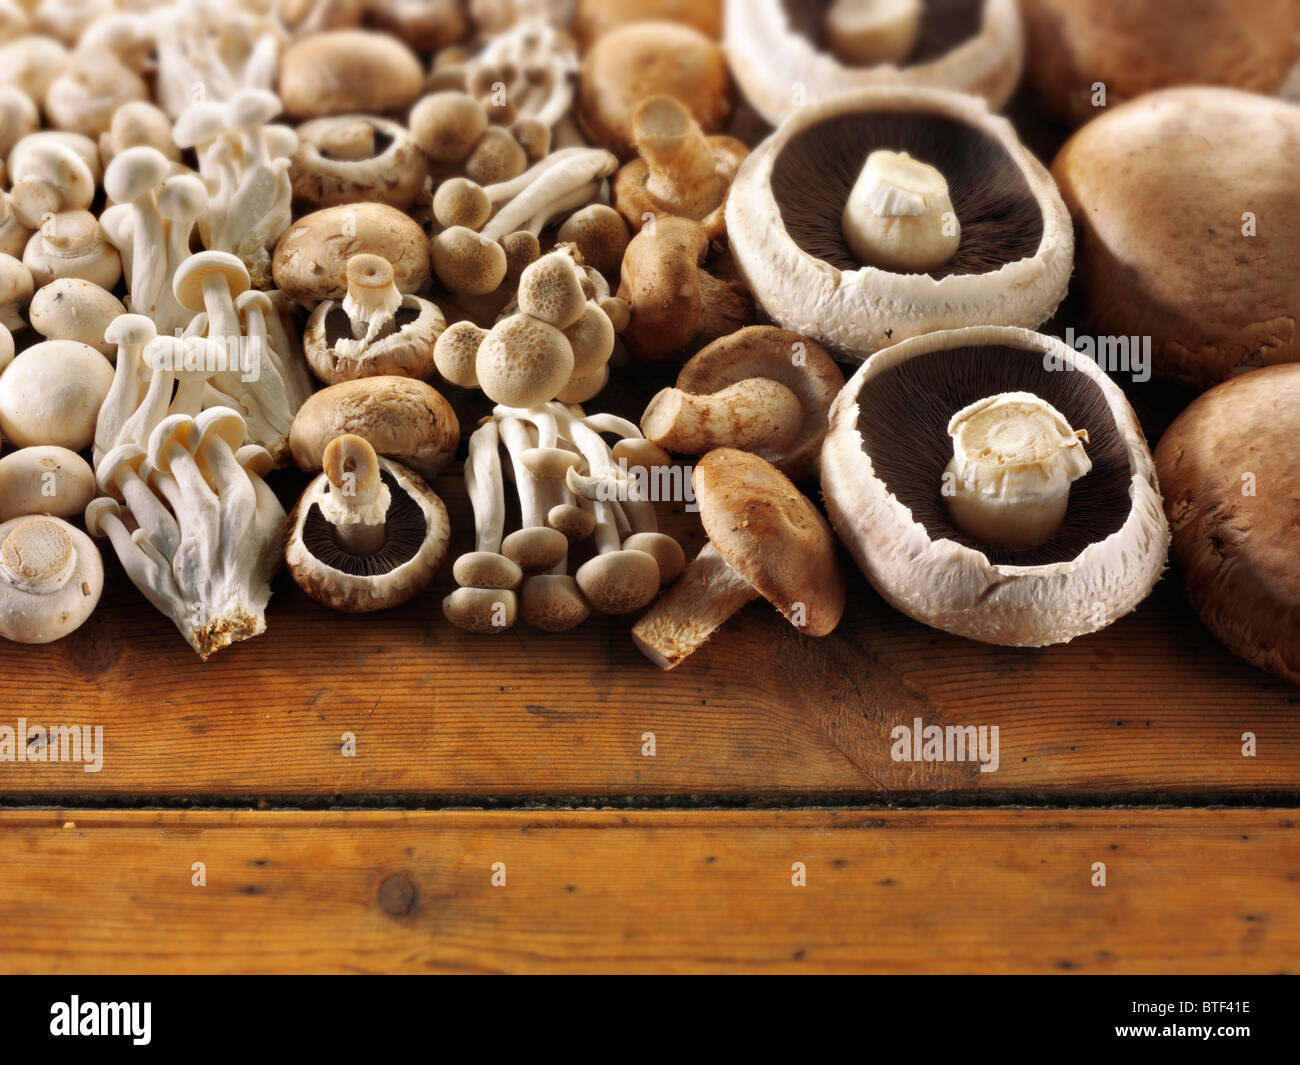 Fresh raw mixed whole cultivated mushrooms arranged on a rustic wooden table Stock Photo